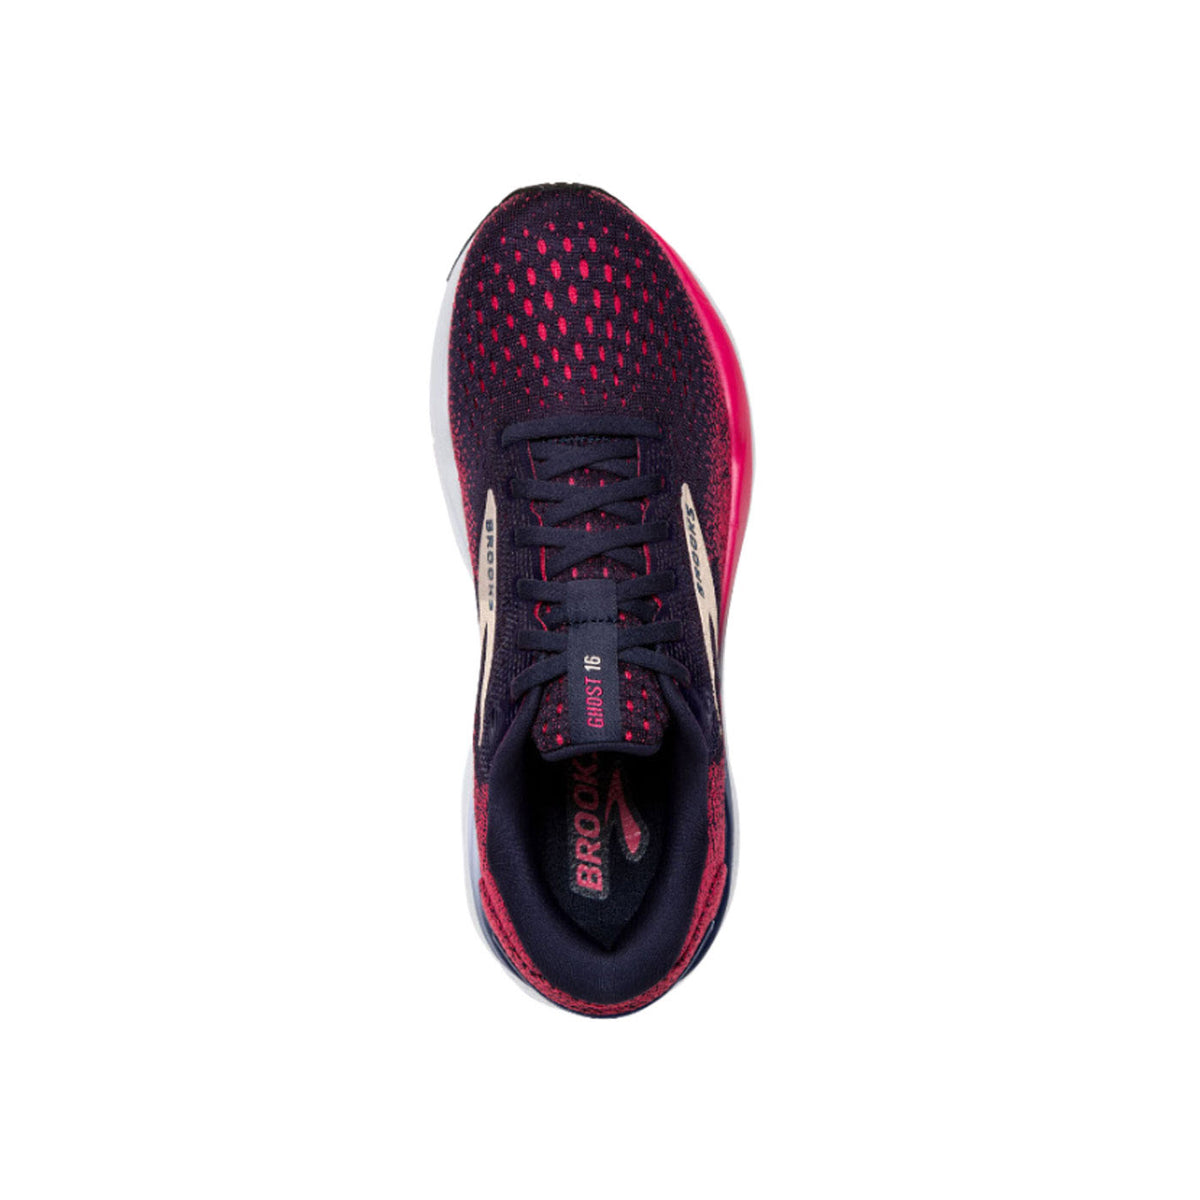 Top view of a single dark, navy blue and reddish Brooks Ghost 16 Peacoat/Raspberry/Apricot running shoe with white Brooks logo on a pure white background.